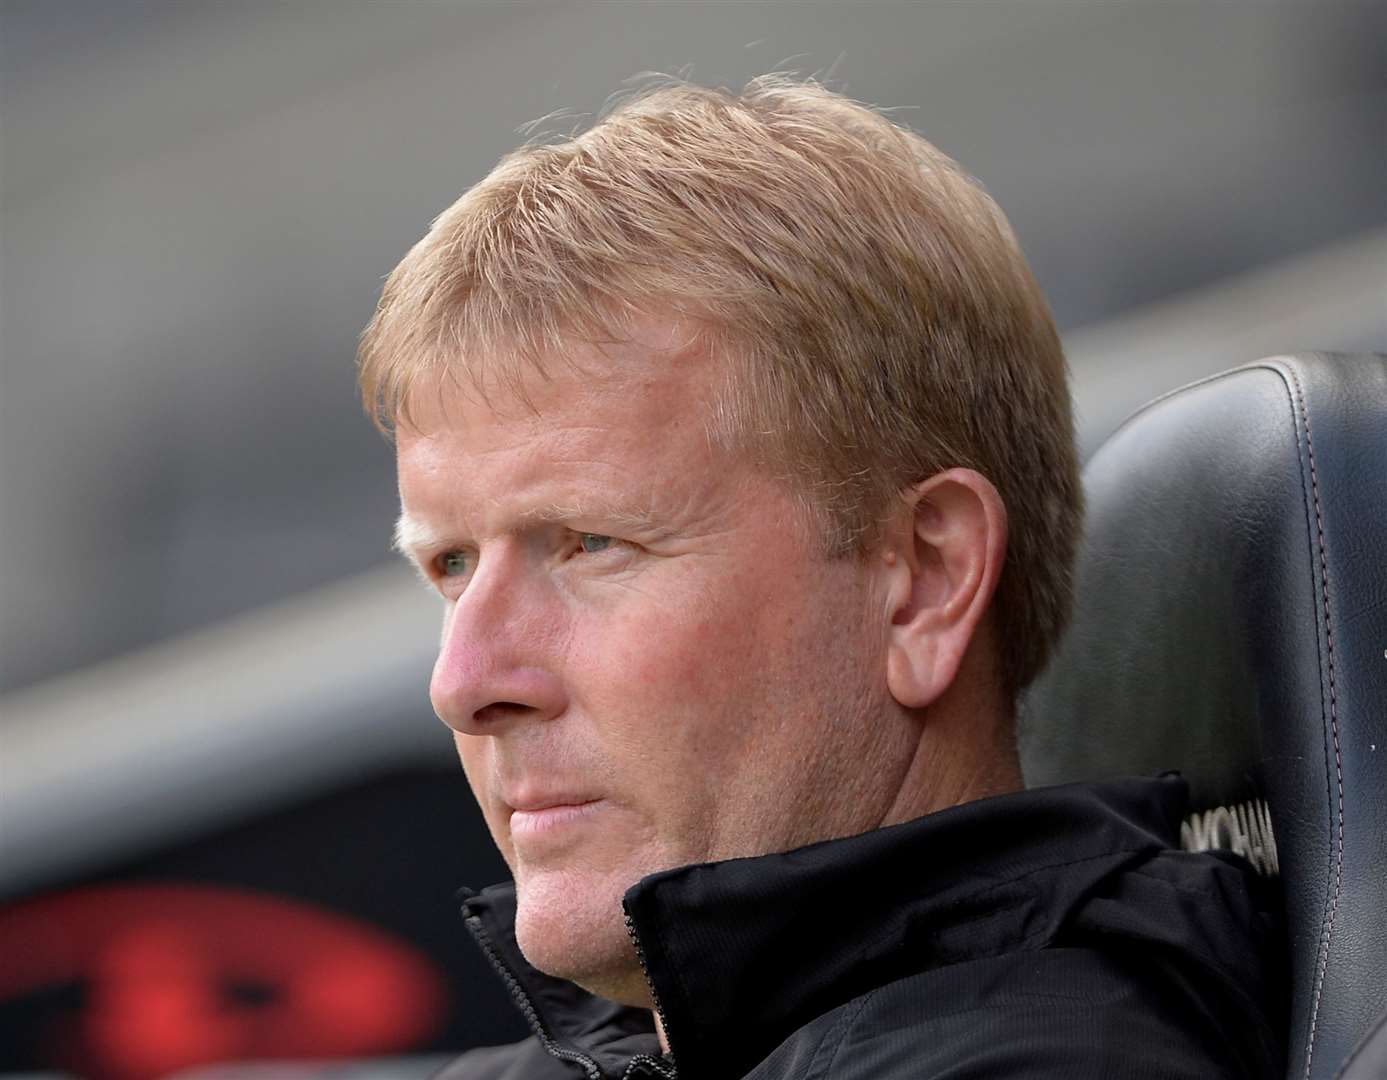 Dartford boss Ady Pennock will play promotion-chasing Maidstone in his first match in charge this Saturday after back-to-back losses. Picture: Ady Kerry